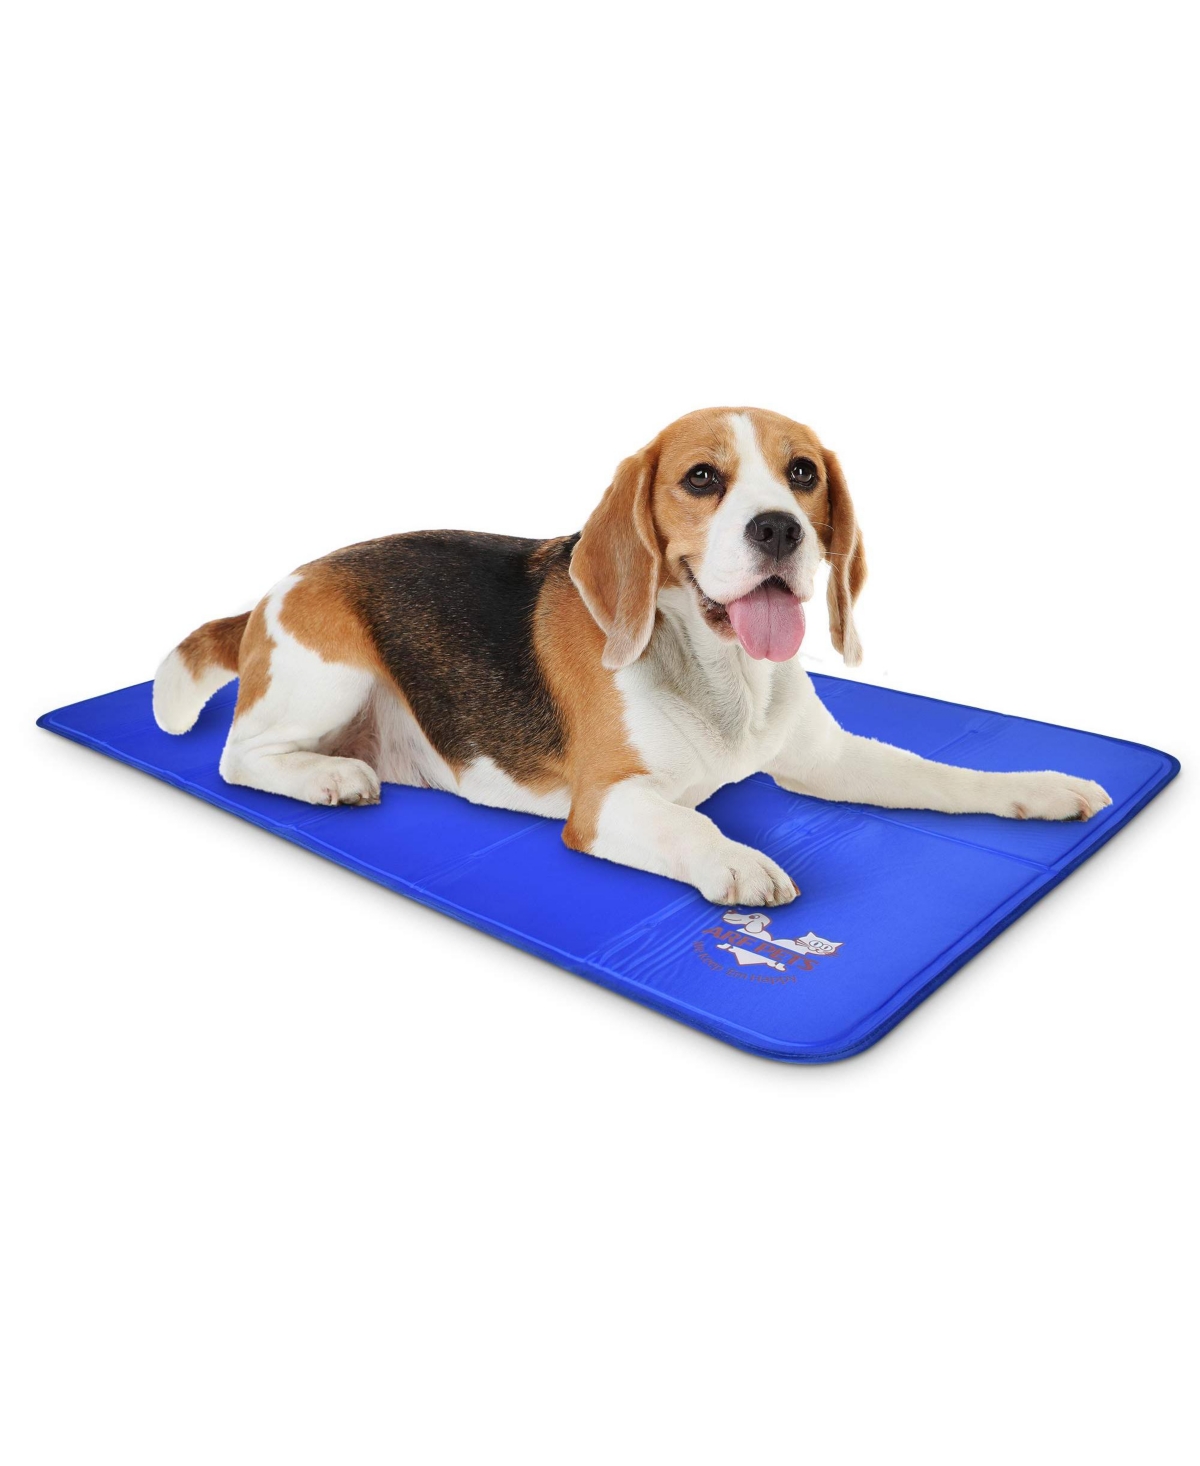 Self Cooling Pet Bed, Dog Mat for Crates and Beds - Medium - Blue